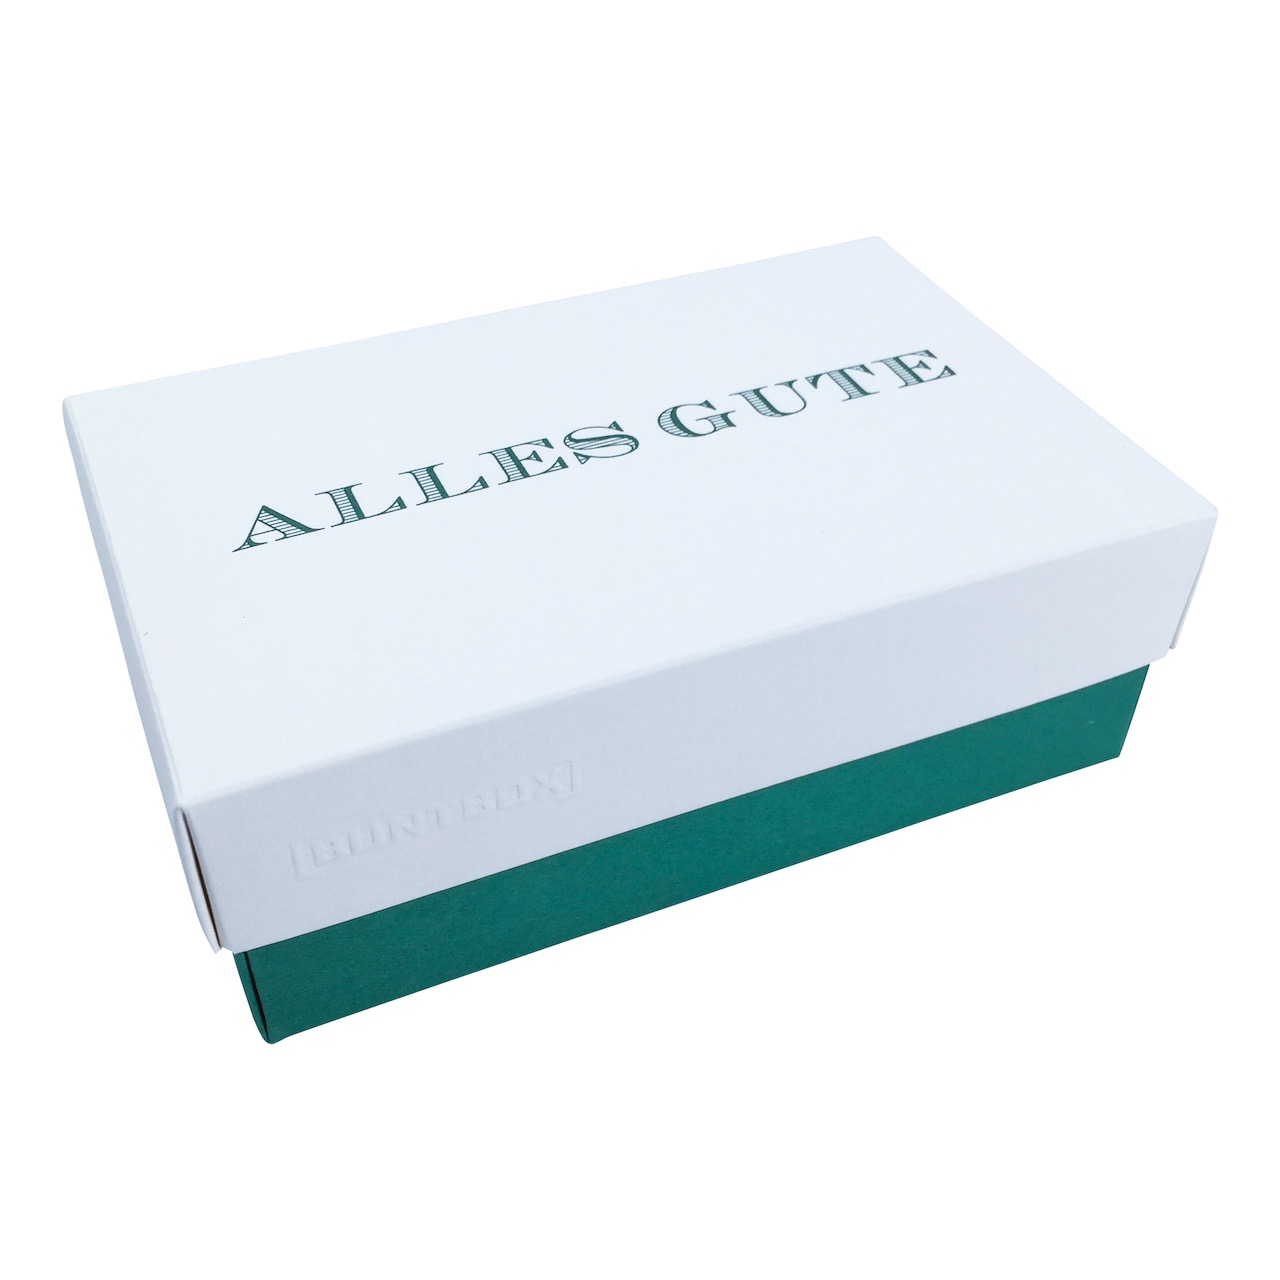 Buntbox M Fine Paper Alles Gute in Champagner-Emerald